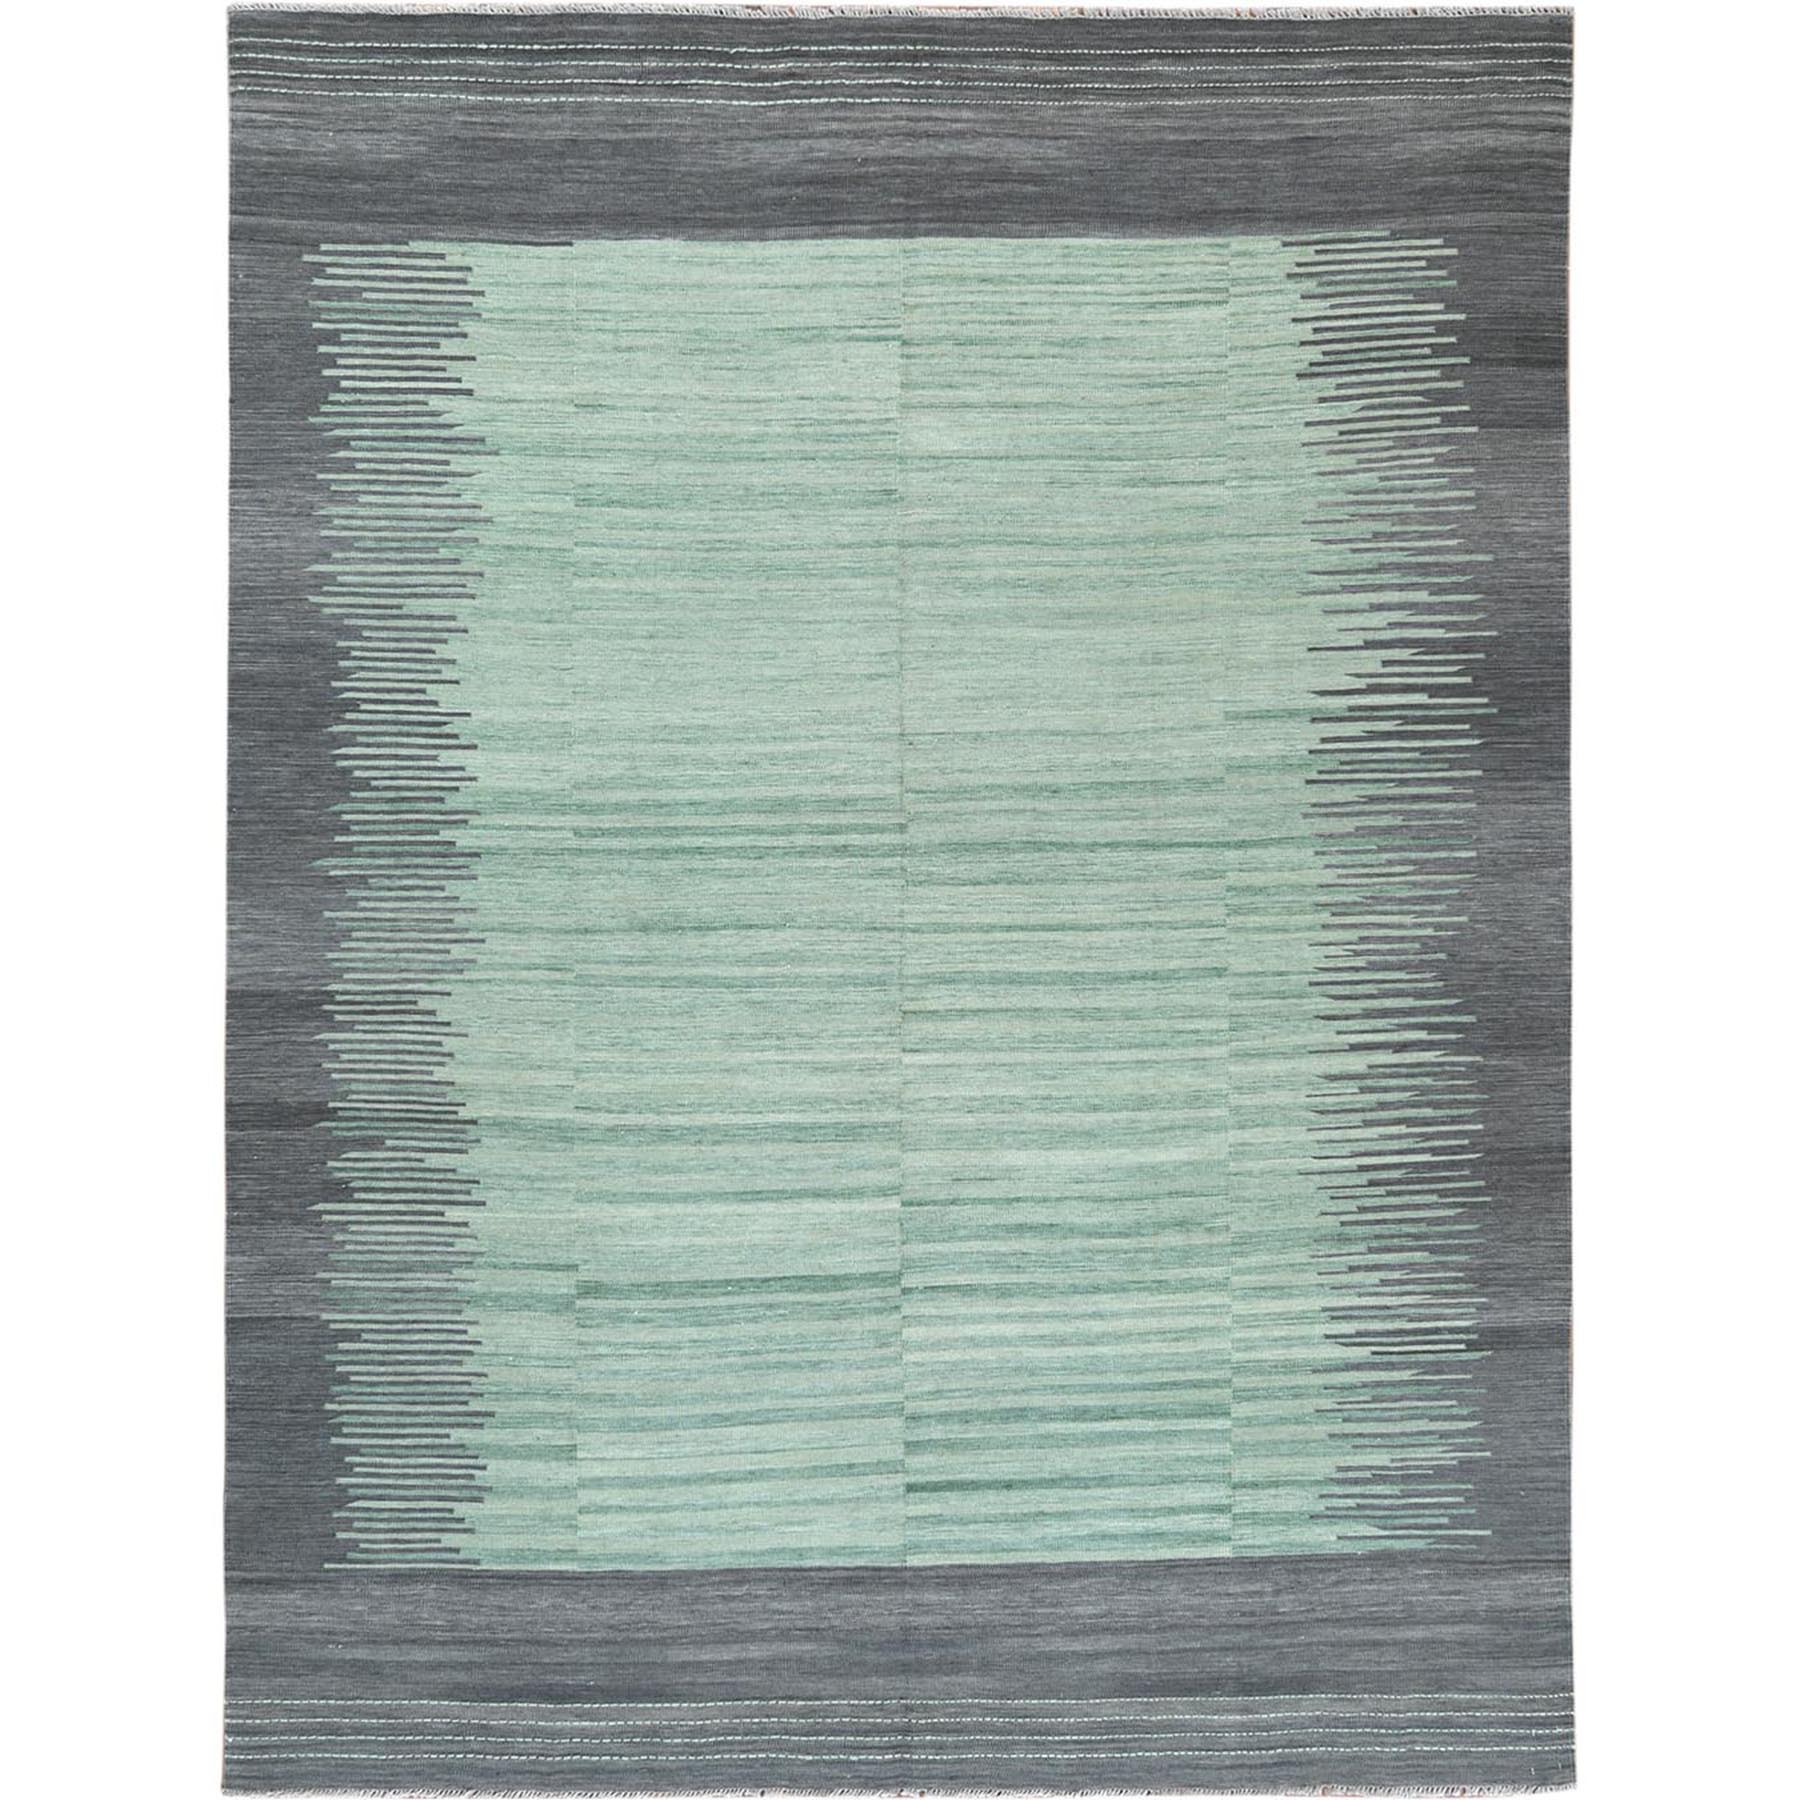 Modern & Contemporary Wool Hand-Woven Area Rug 8'2